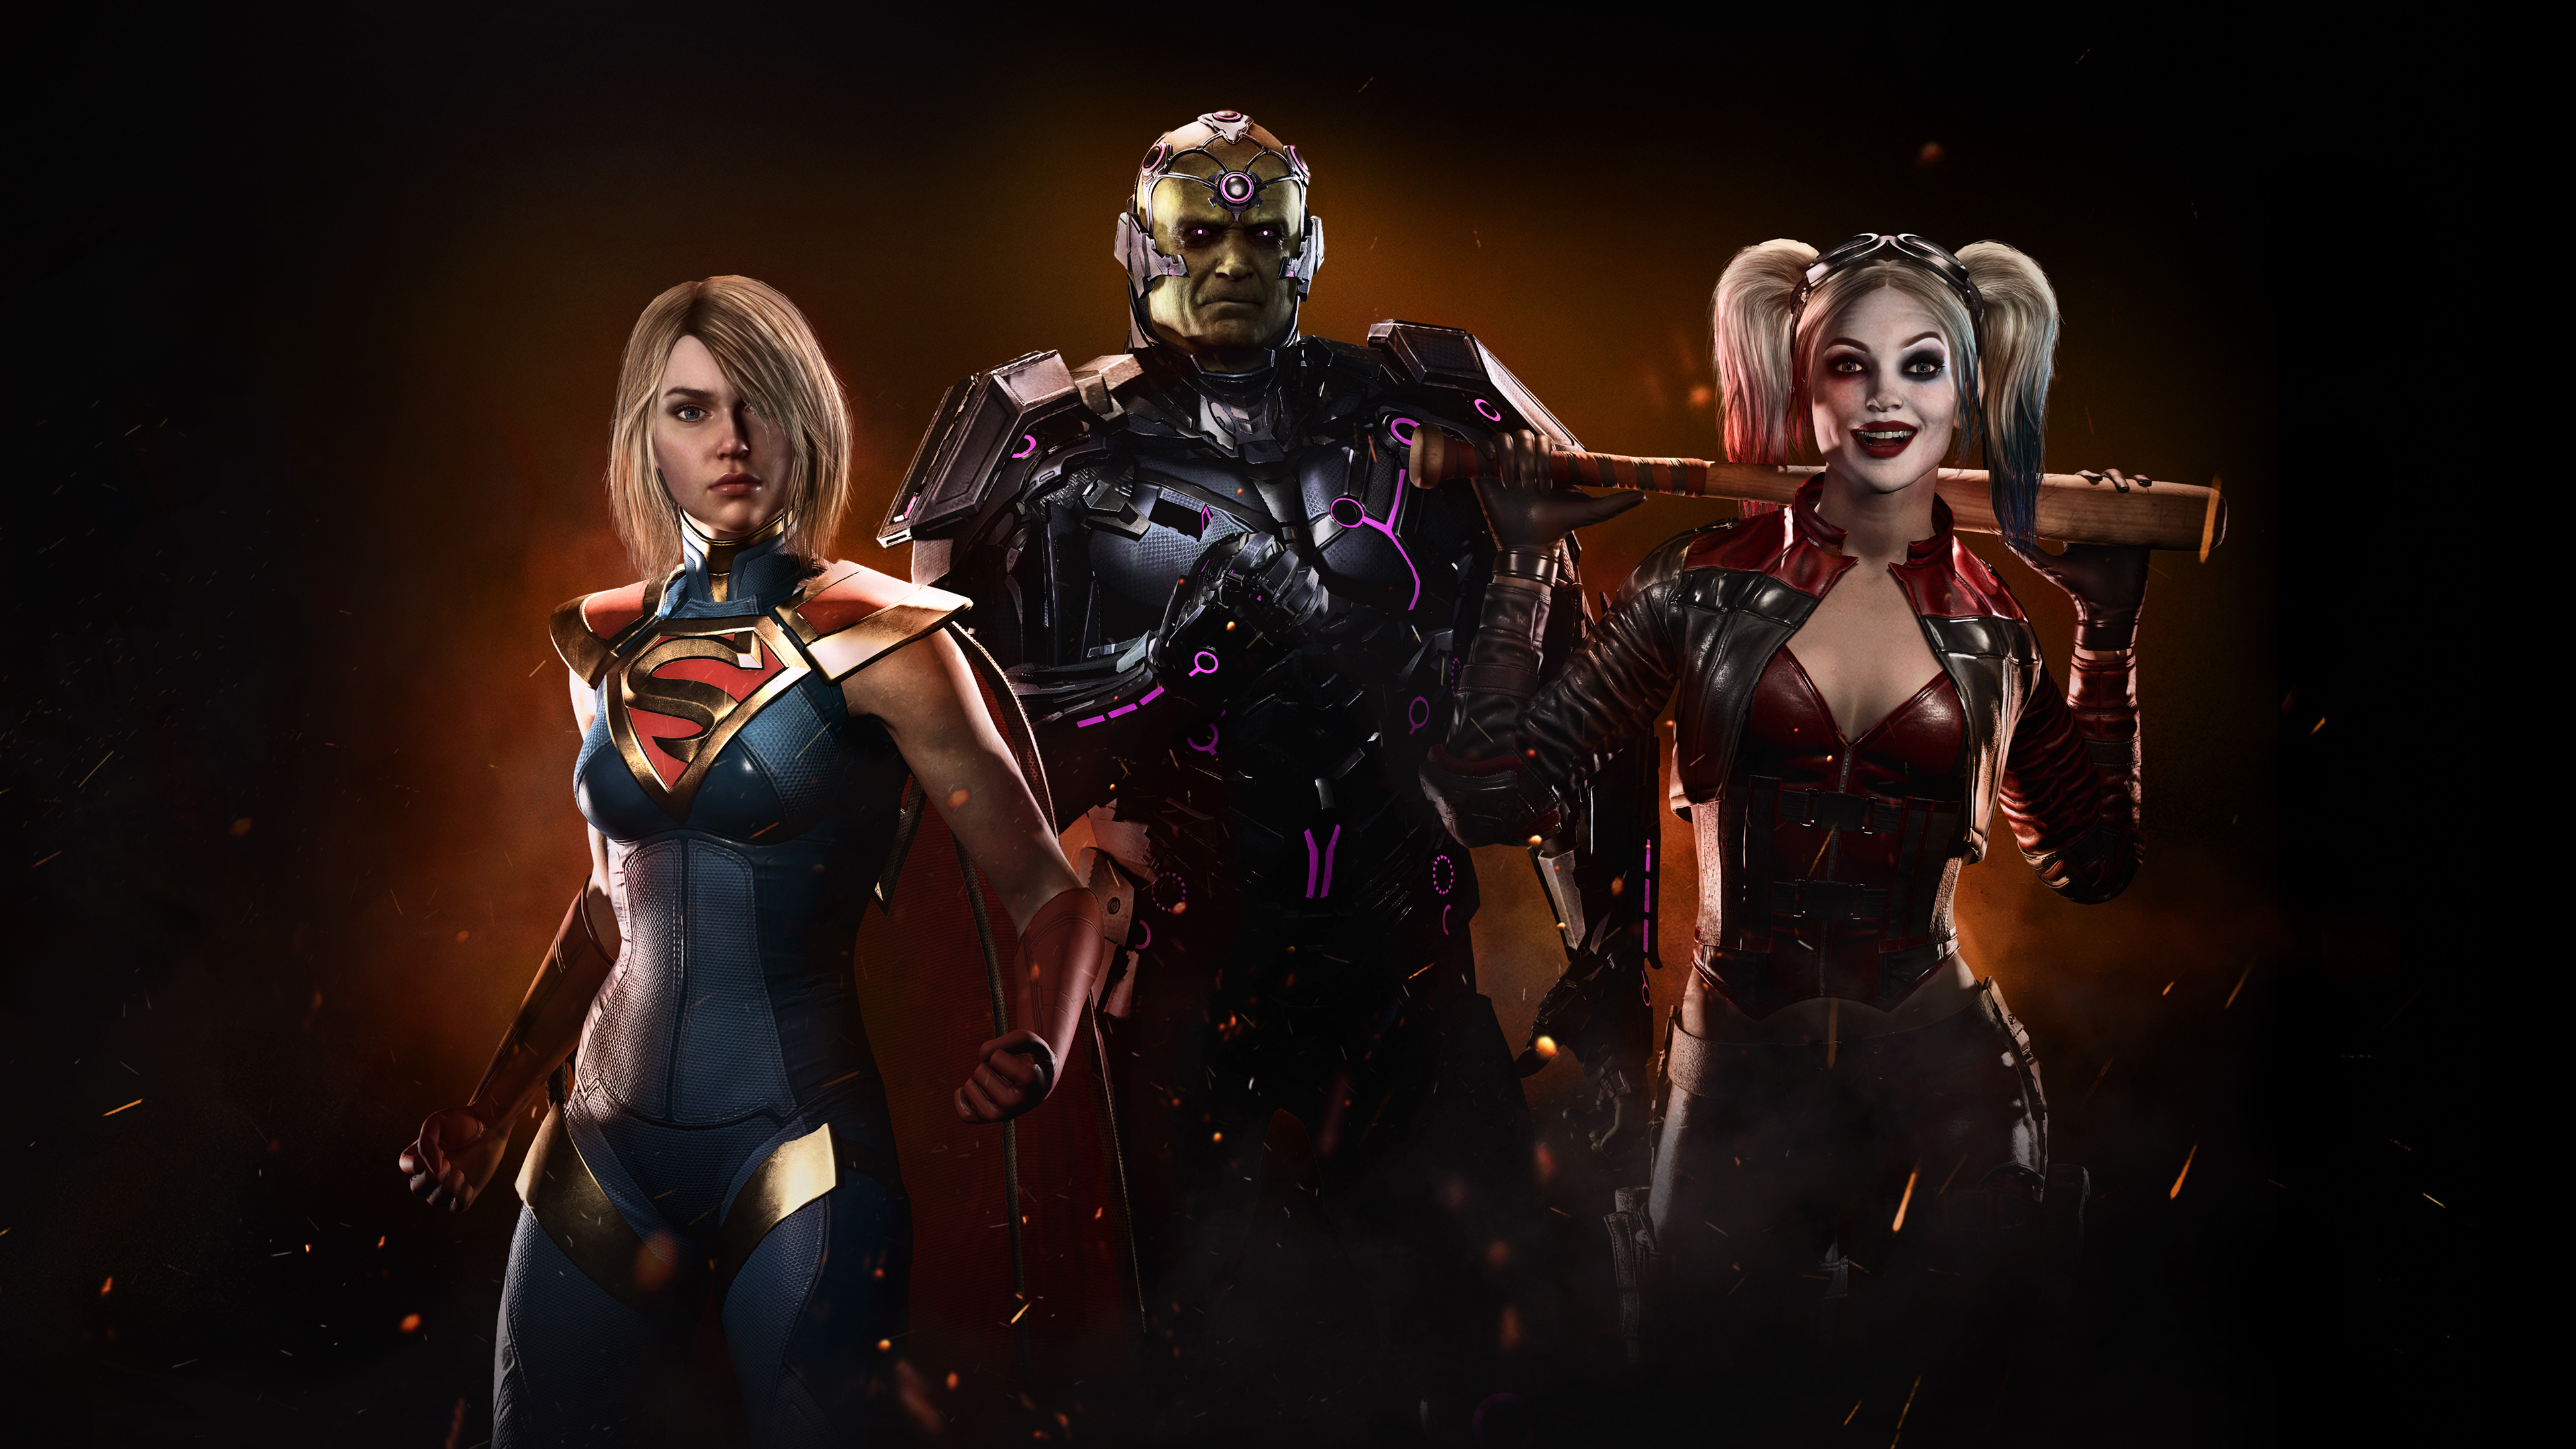 Wallpapers injustice 2 computer games the 2018 Games on the desktop